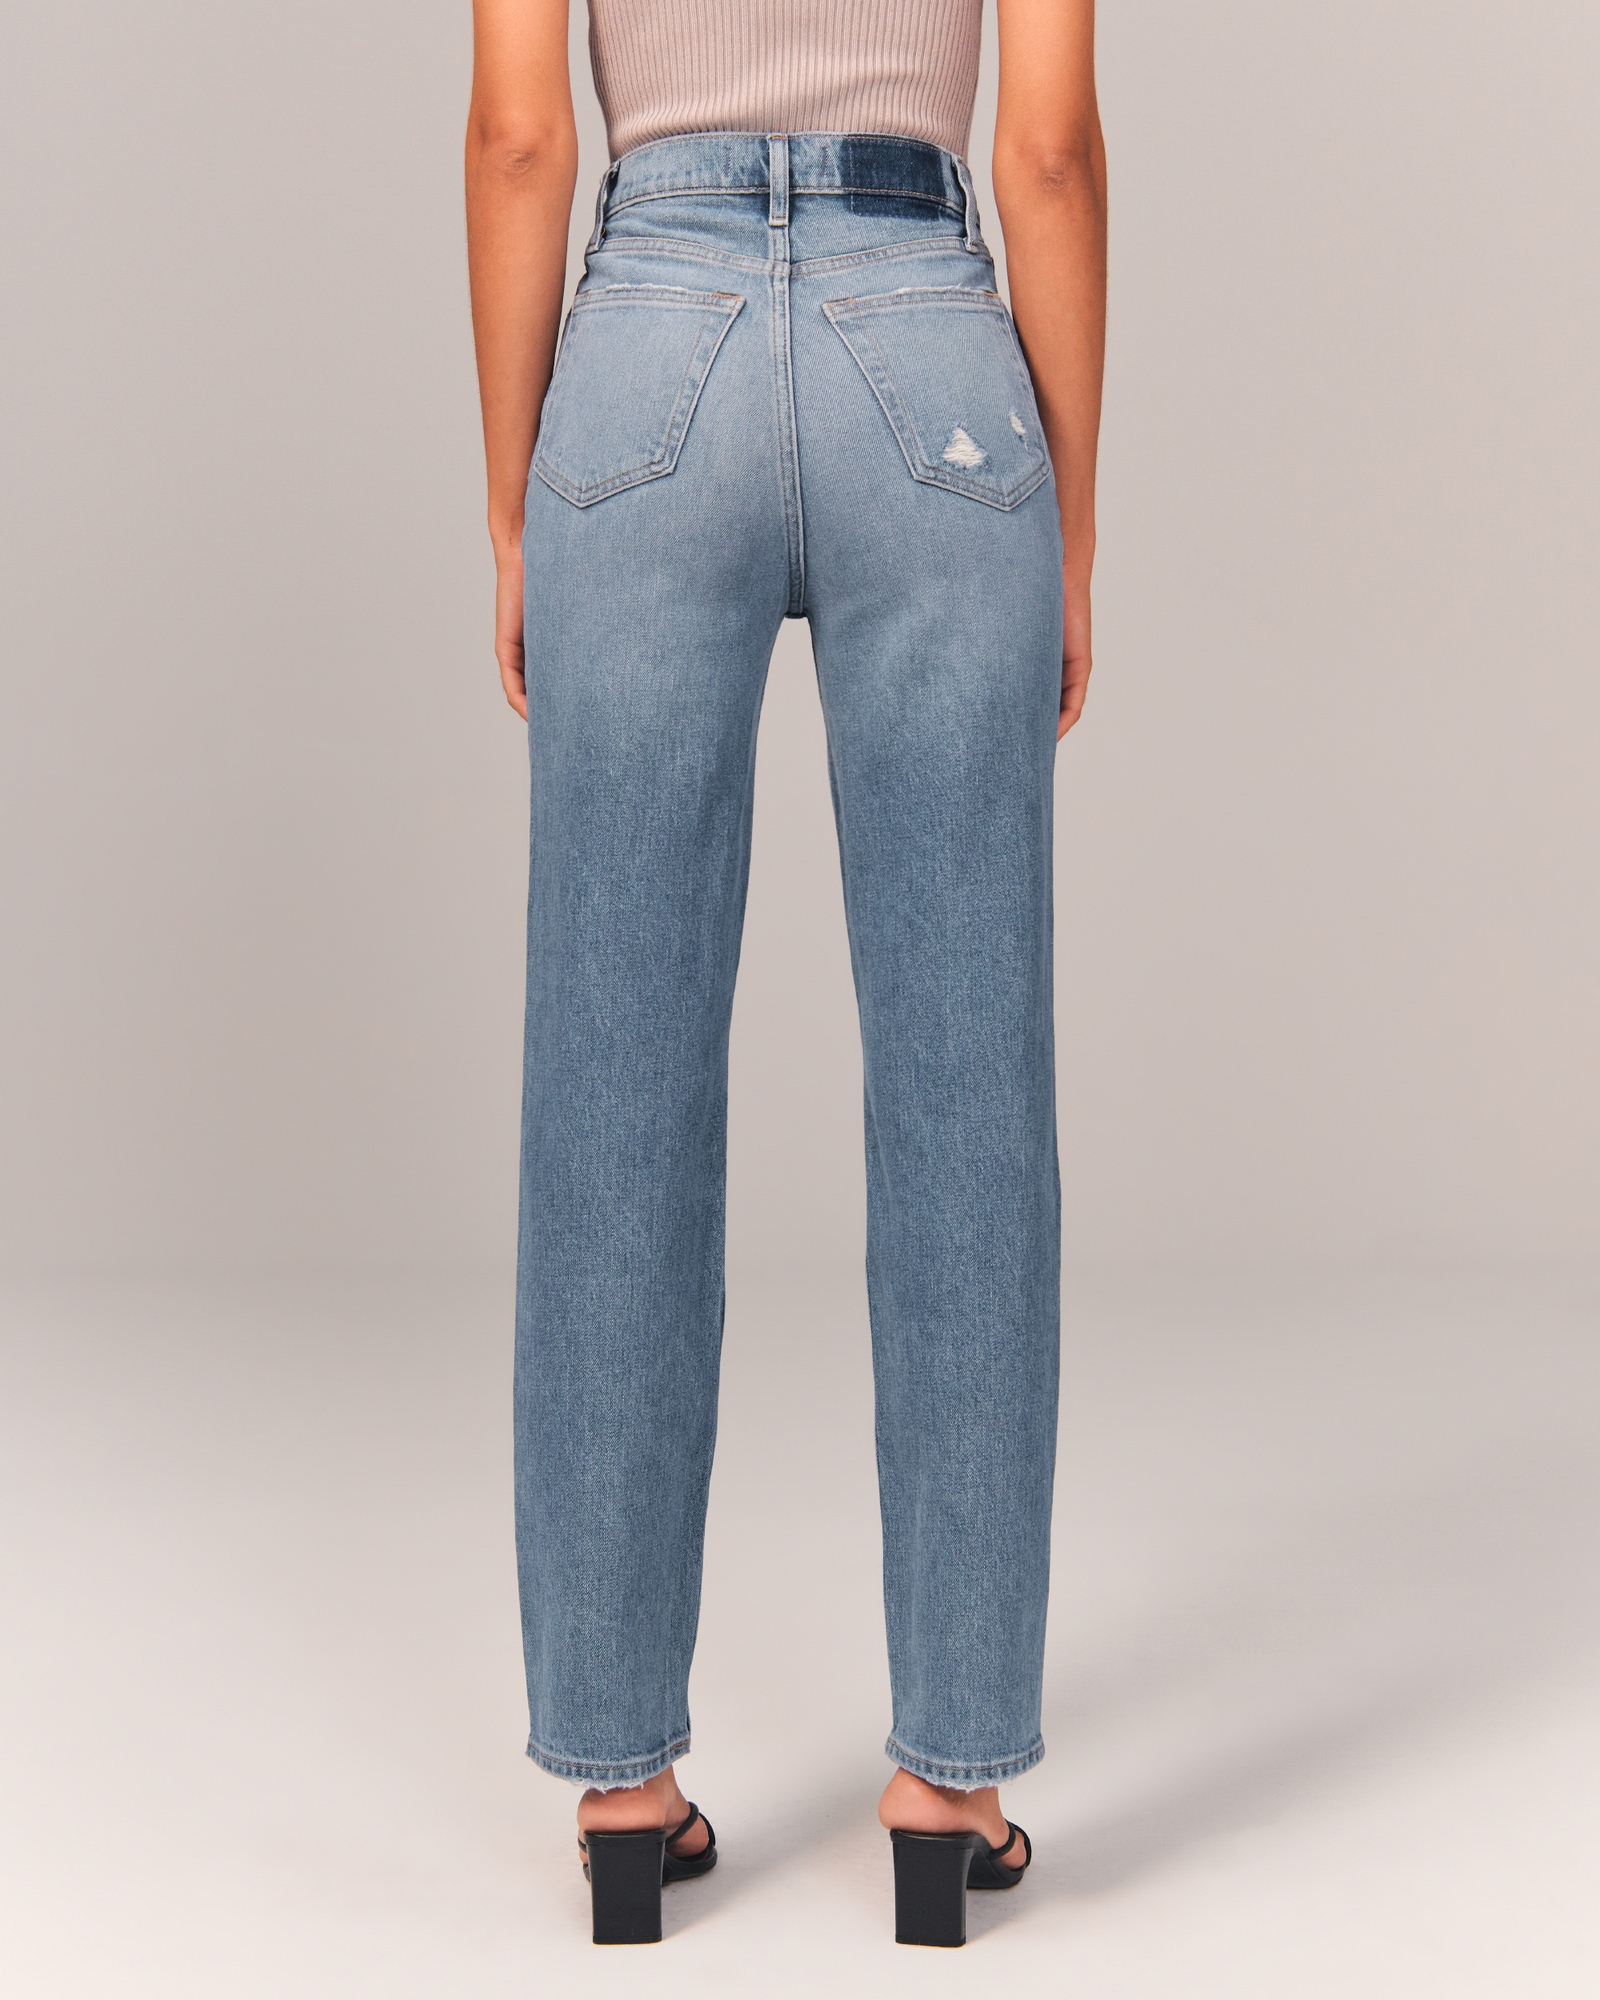 Comparing Abercrombie's Criss-Cross Waistband Jeans 